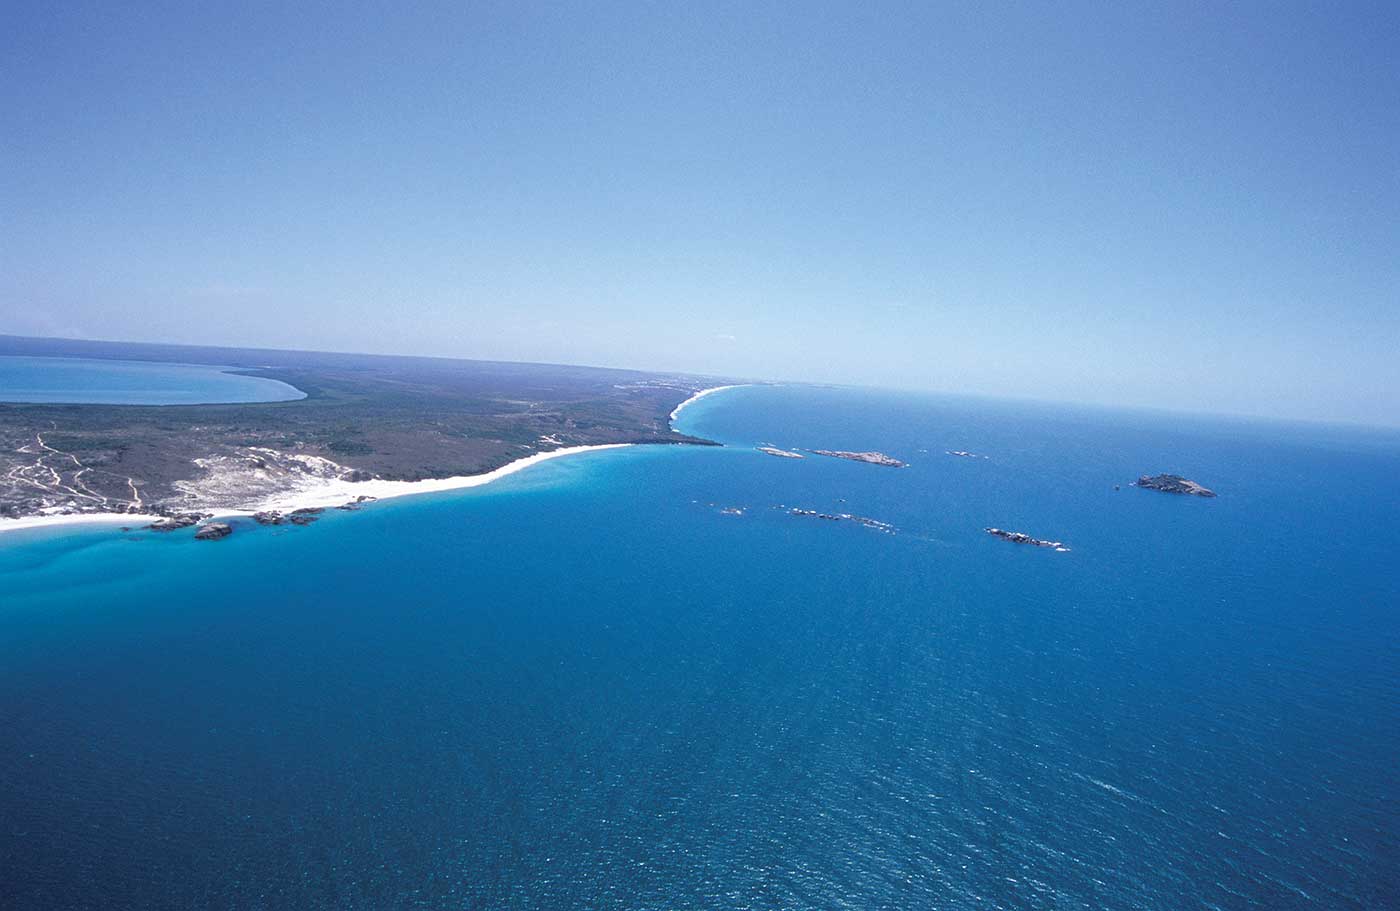 A colour photograph of part of a peninsula. The photograph has been taken from an aeroplane. The peninsula is to the left of the photograph; it has a white sandy beach on the coastline closest to the camera. In the foreground, stretching back to the horizon, is the ocean, which is a deep blue colour. The sky is in the upper part of the photograph; it is a more pale blue in comparison to the ocean.